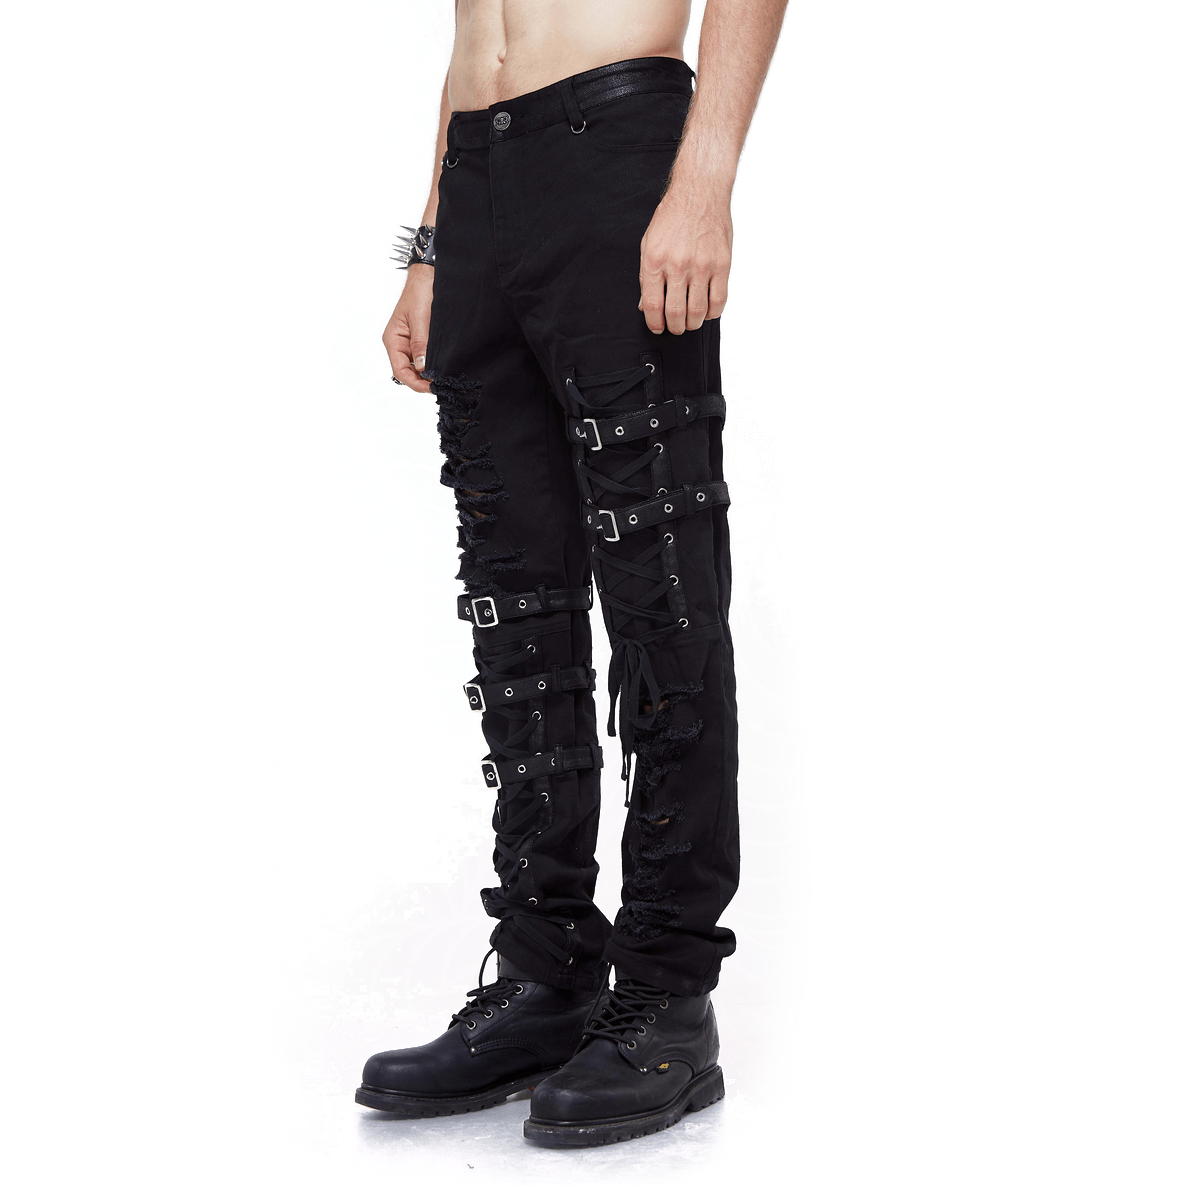 Steampunk Mens Winter Pants Victorian Gothic Punk Black Fitted Straight  Smart Black Trousers With Zipper From Allegroo, $57.47 | DHgate.Com